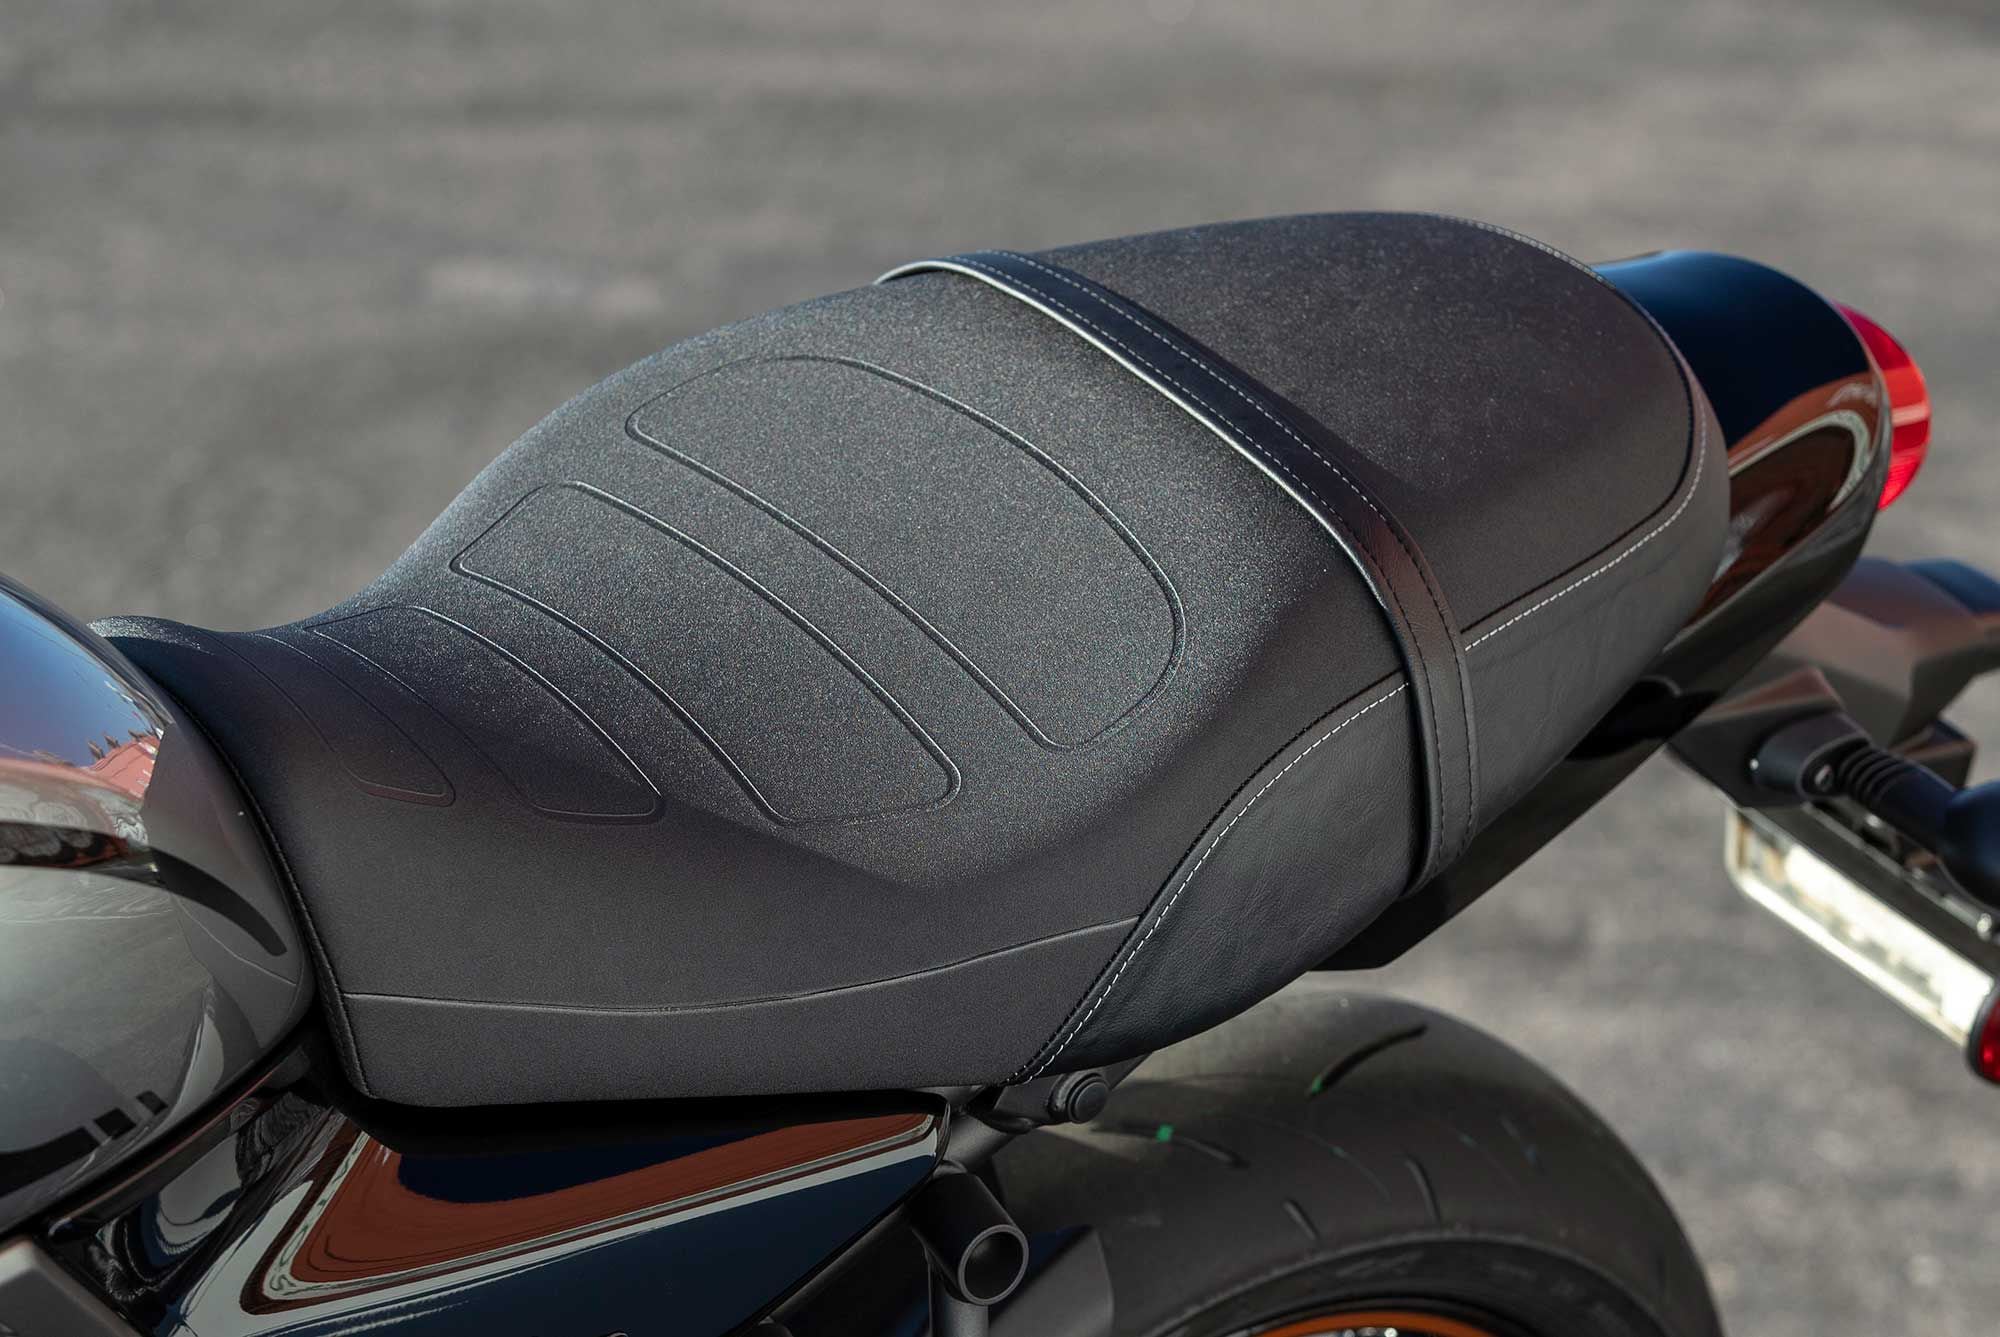 The Z650RS-specific seat is designed to be slimmer up front for easy reach to the ground. You can also remove it to access the fuse box as well as an included… wait for it… tool kit.